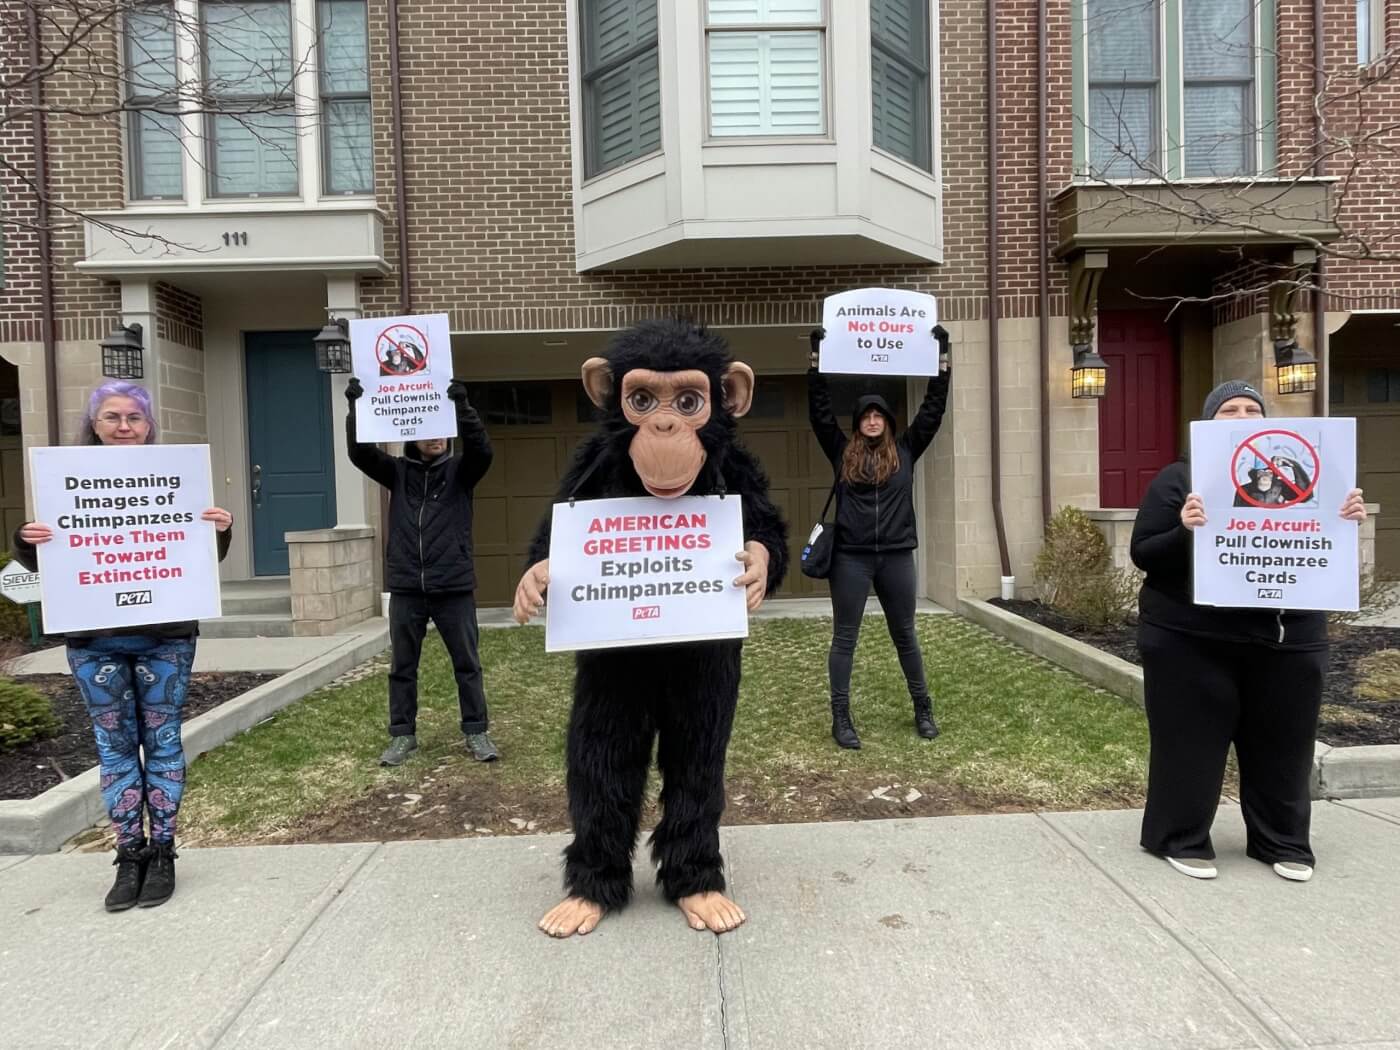 protestors dressed as chimpanzees speaking up for animals used for entertainment outside American Greetings CEO's house